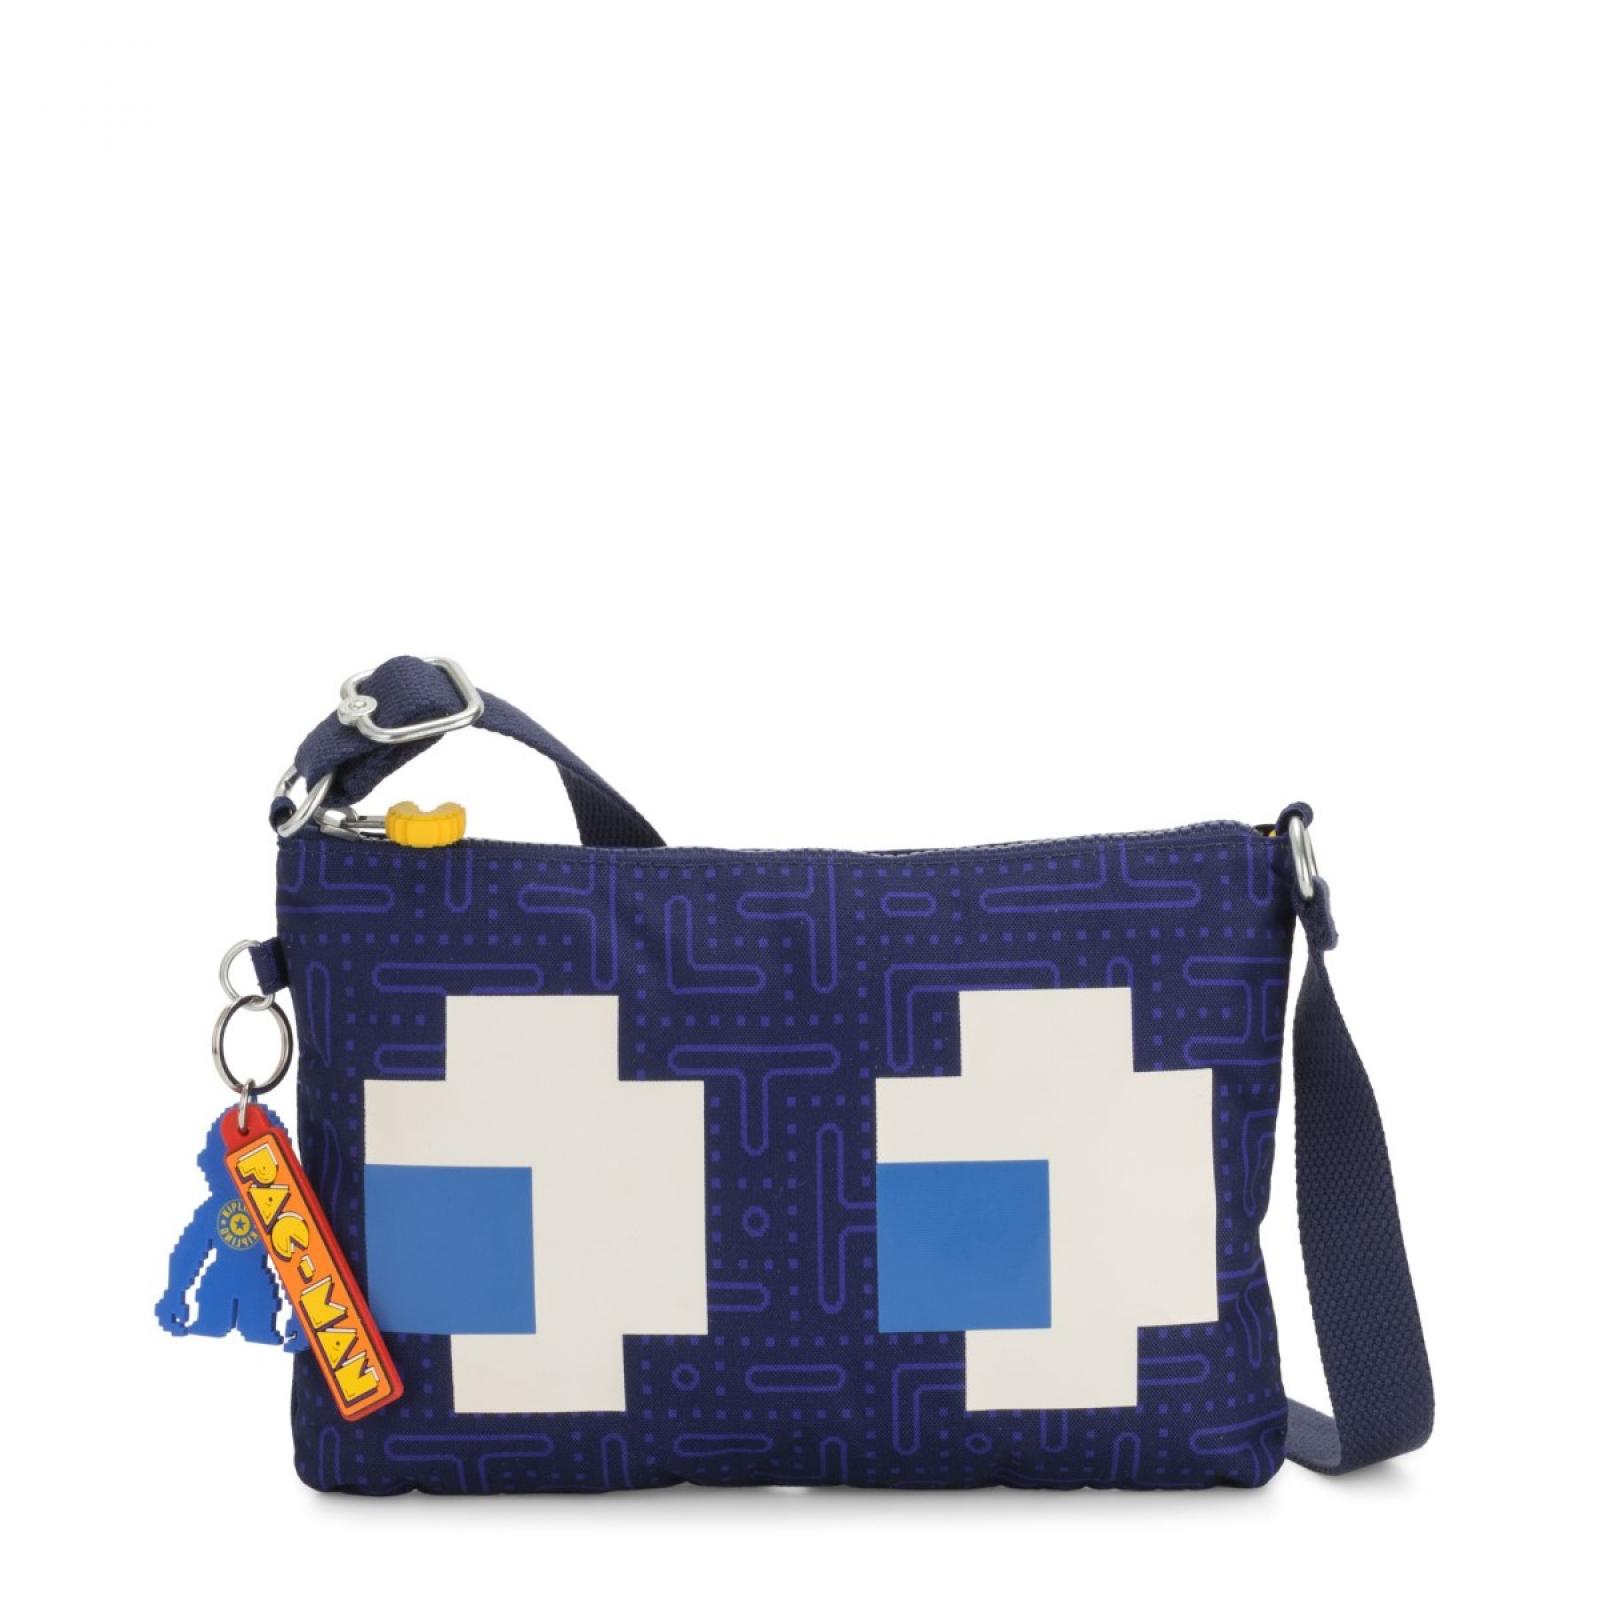 Kipling Tracolla Adria Pac Man Collection - 1